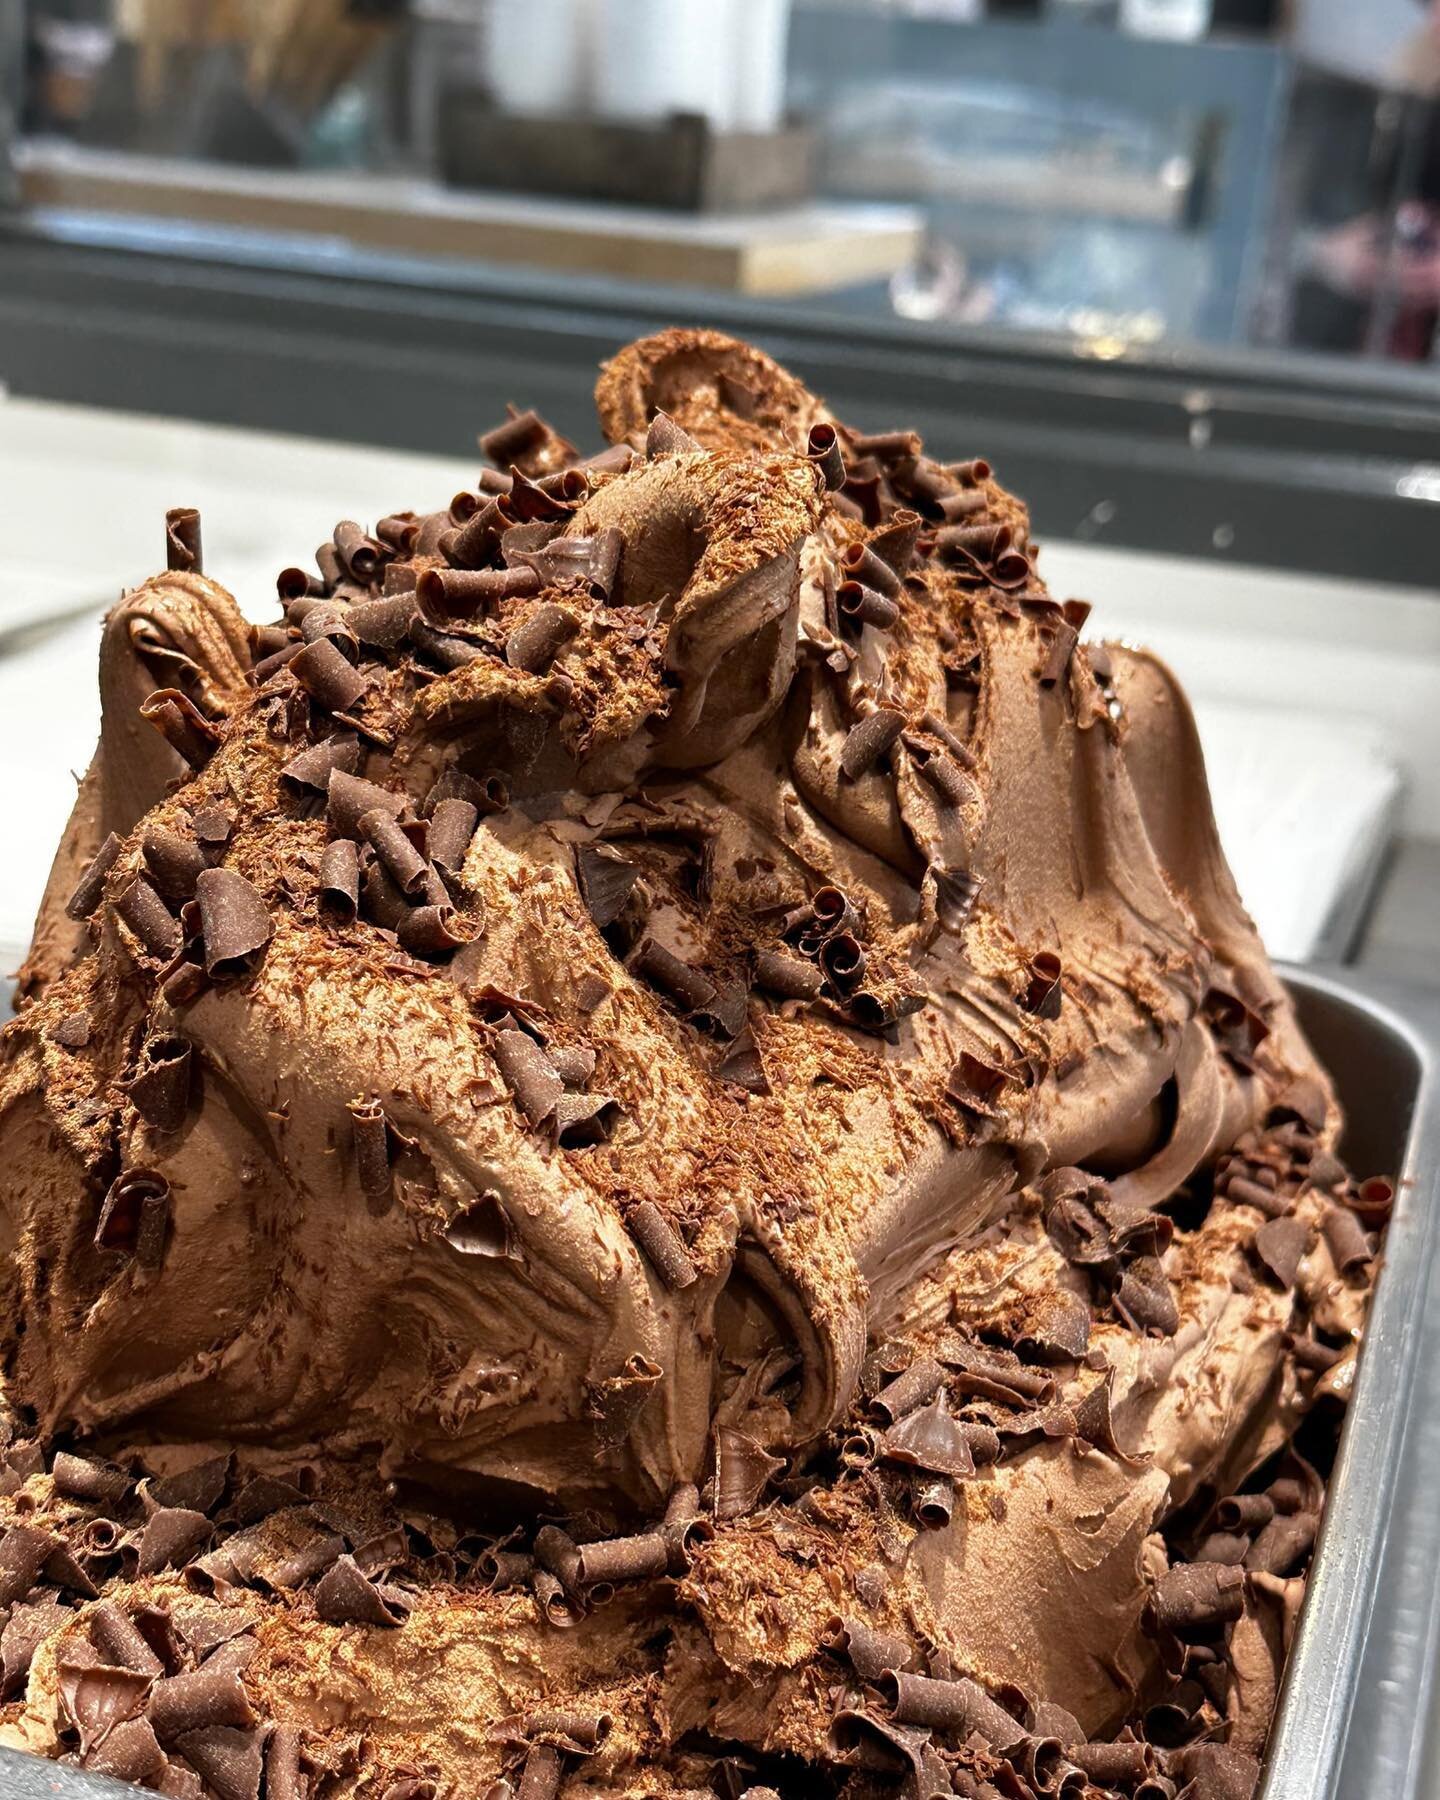 Bank Holiday Monday is a go!! 

We&rsquo;re all about the classic chocolate freckle today! 

We&rsquo;re open from 11.30am today! 

🍦🍦